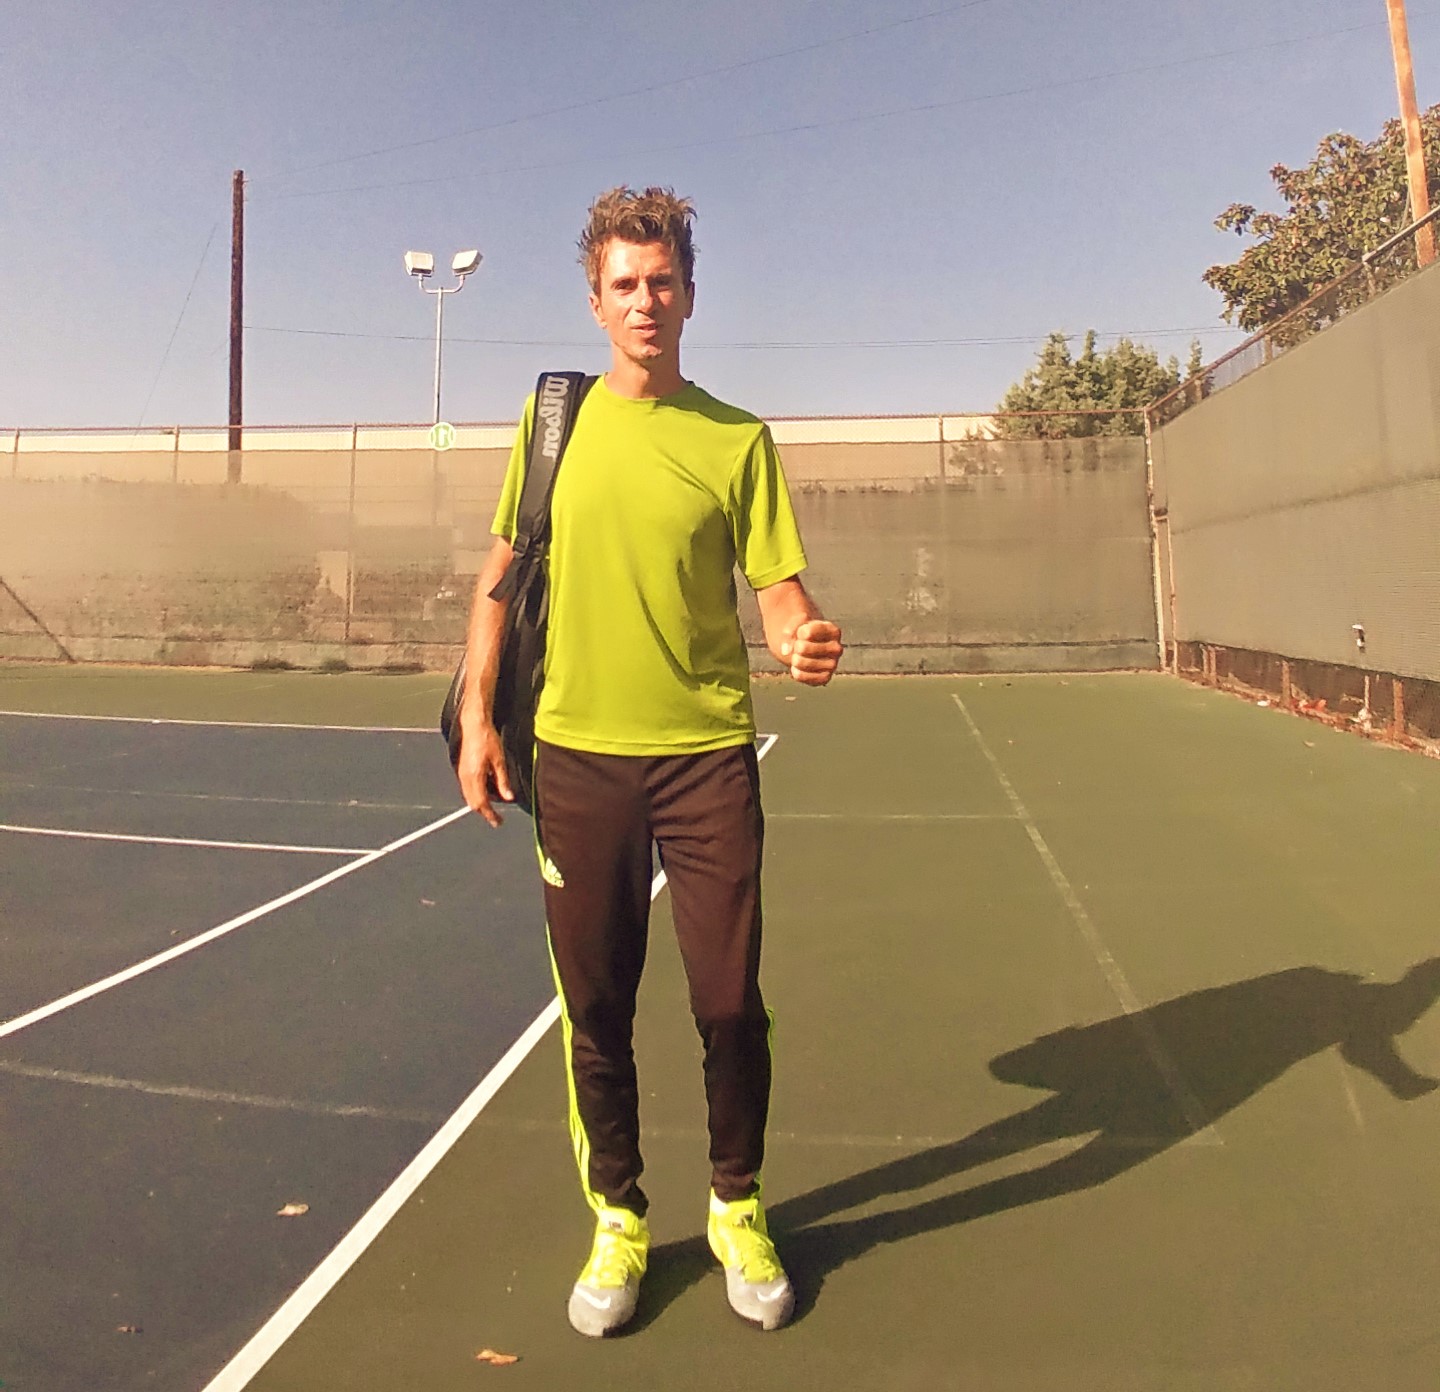 Ilya S. teaches tennis lessons in Los Angeles, CA